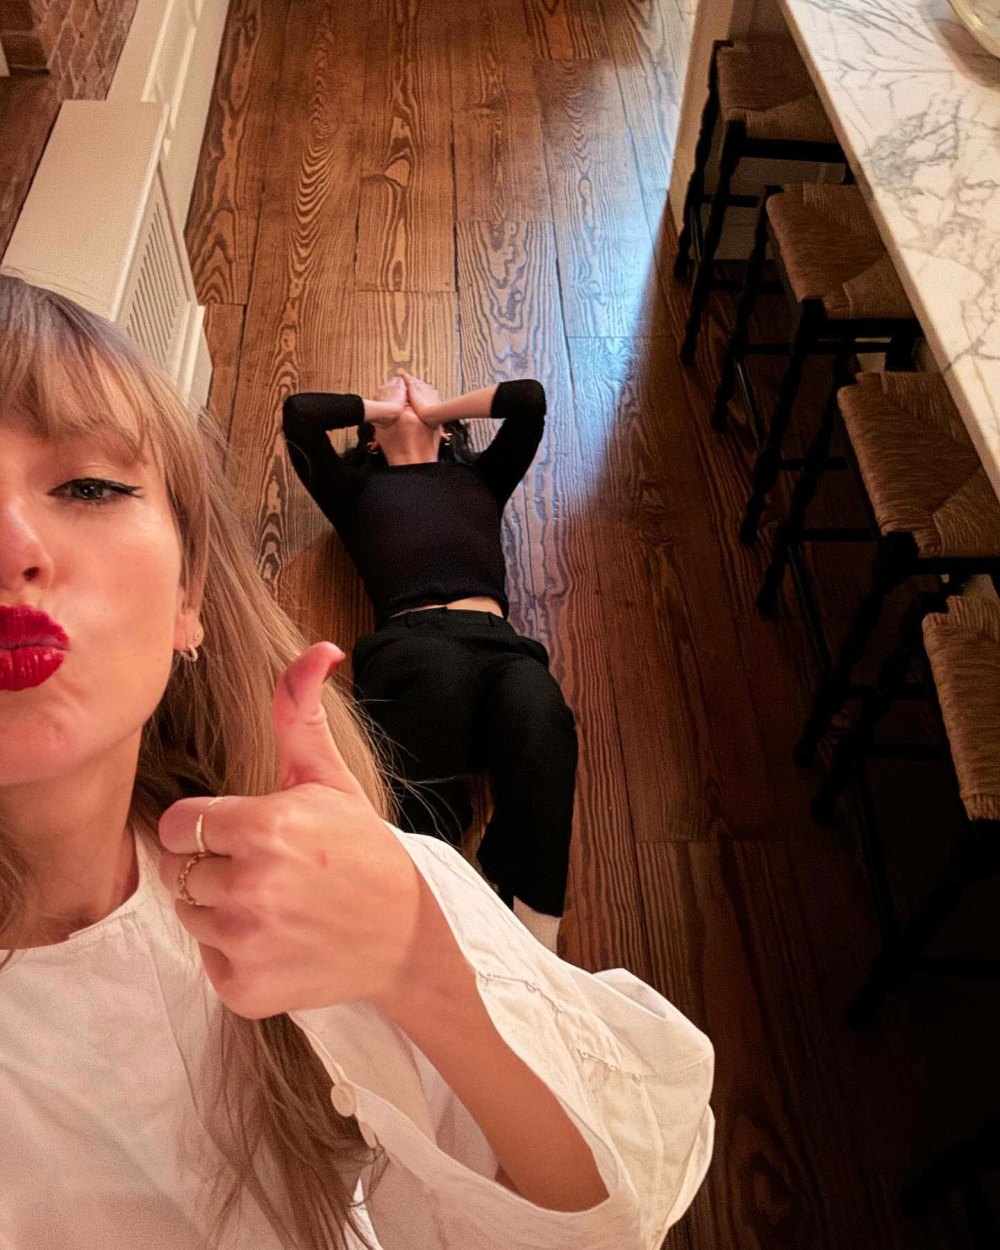 Gracie Abrams Reveals What Taylor Swift Song She Was Listening to In Viral Crying Photos 575